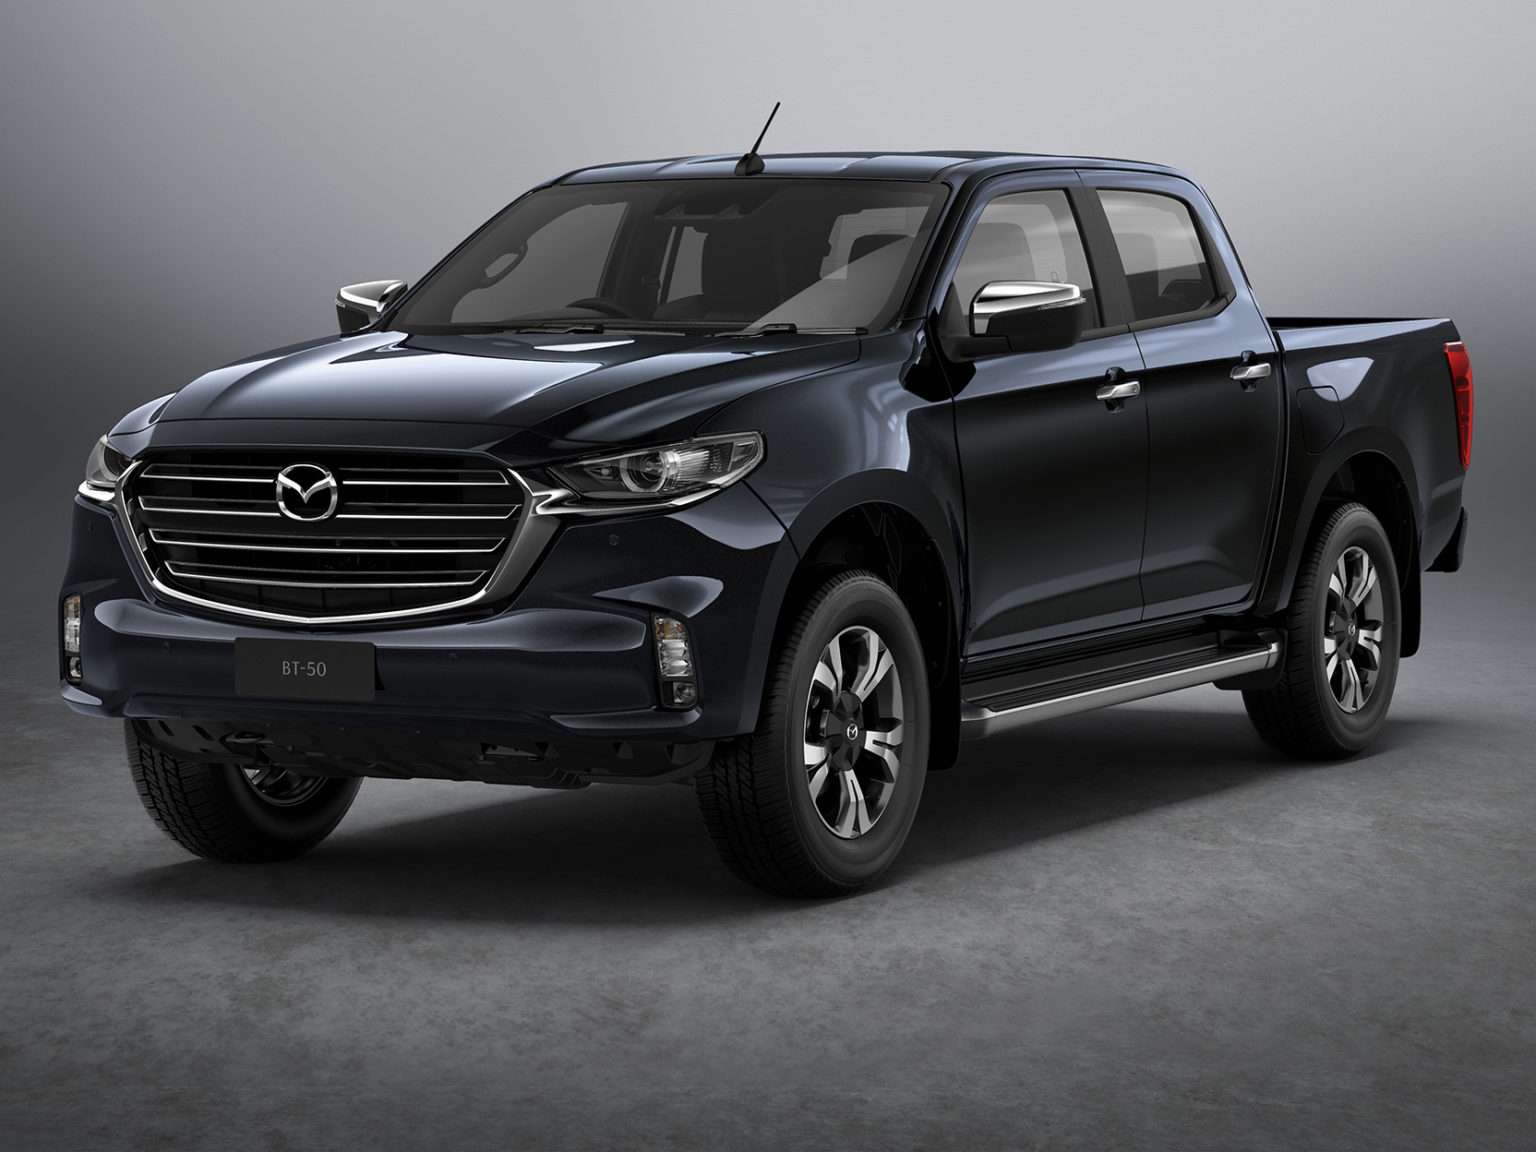 The redesigned Mazda BT-50 made its debut a few weeks ago.